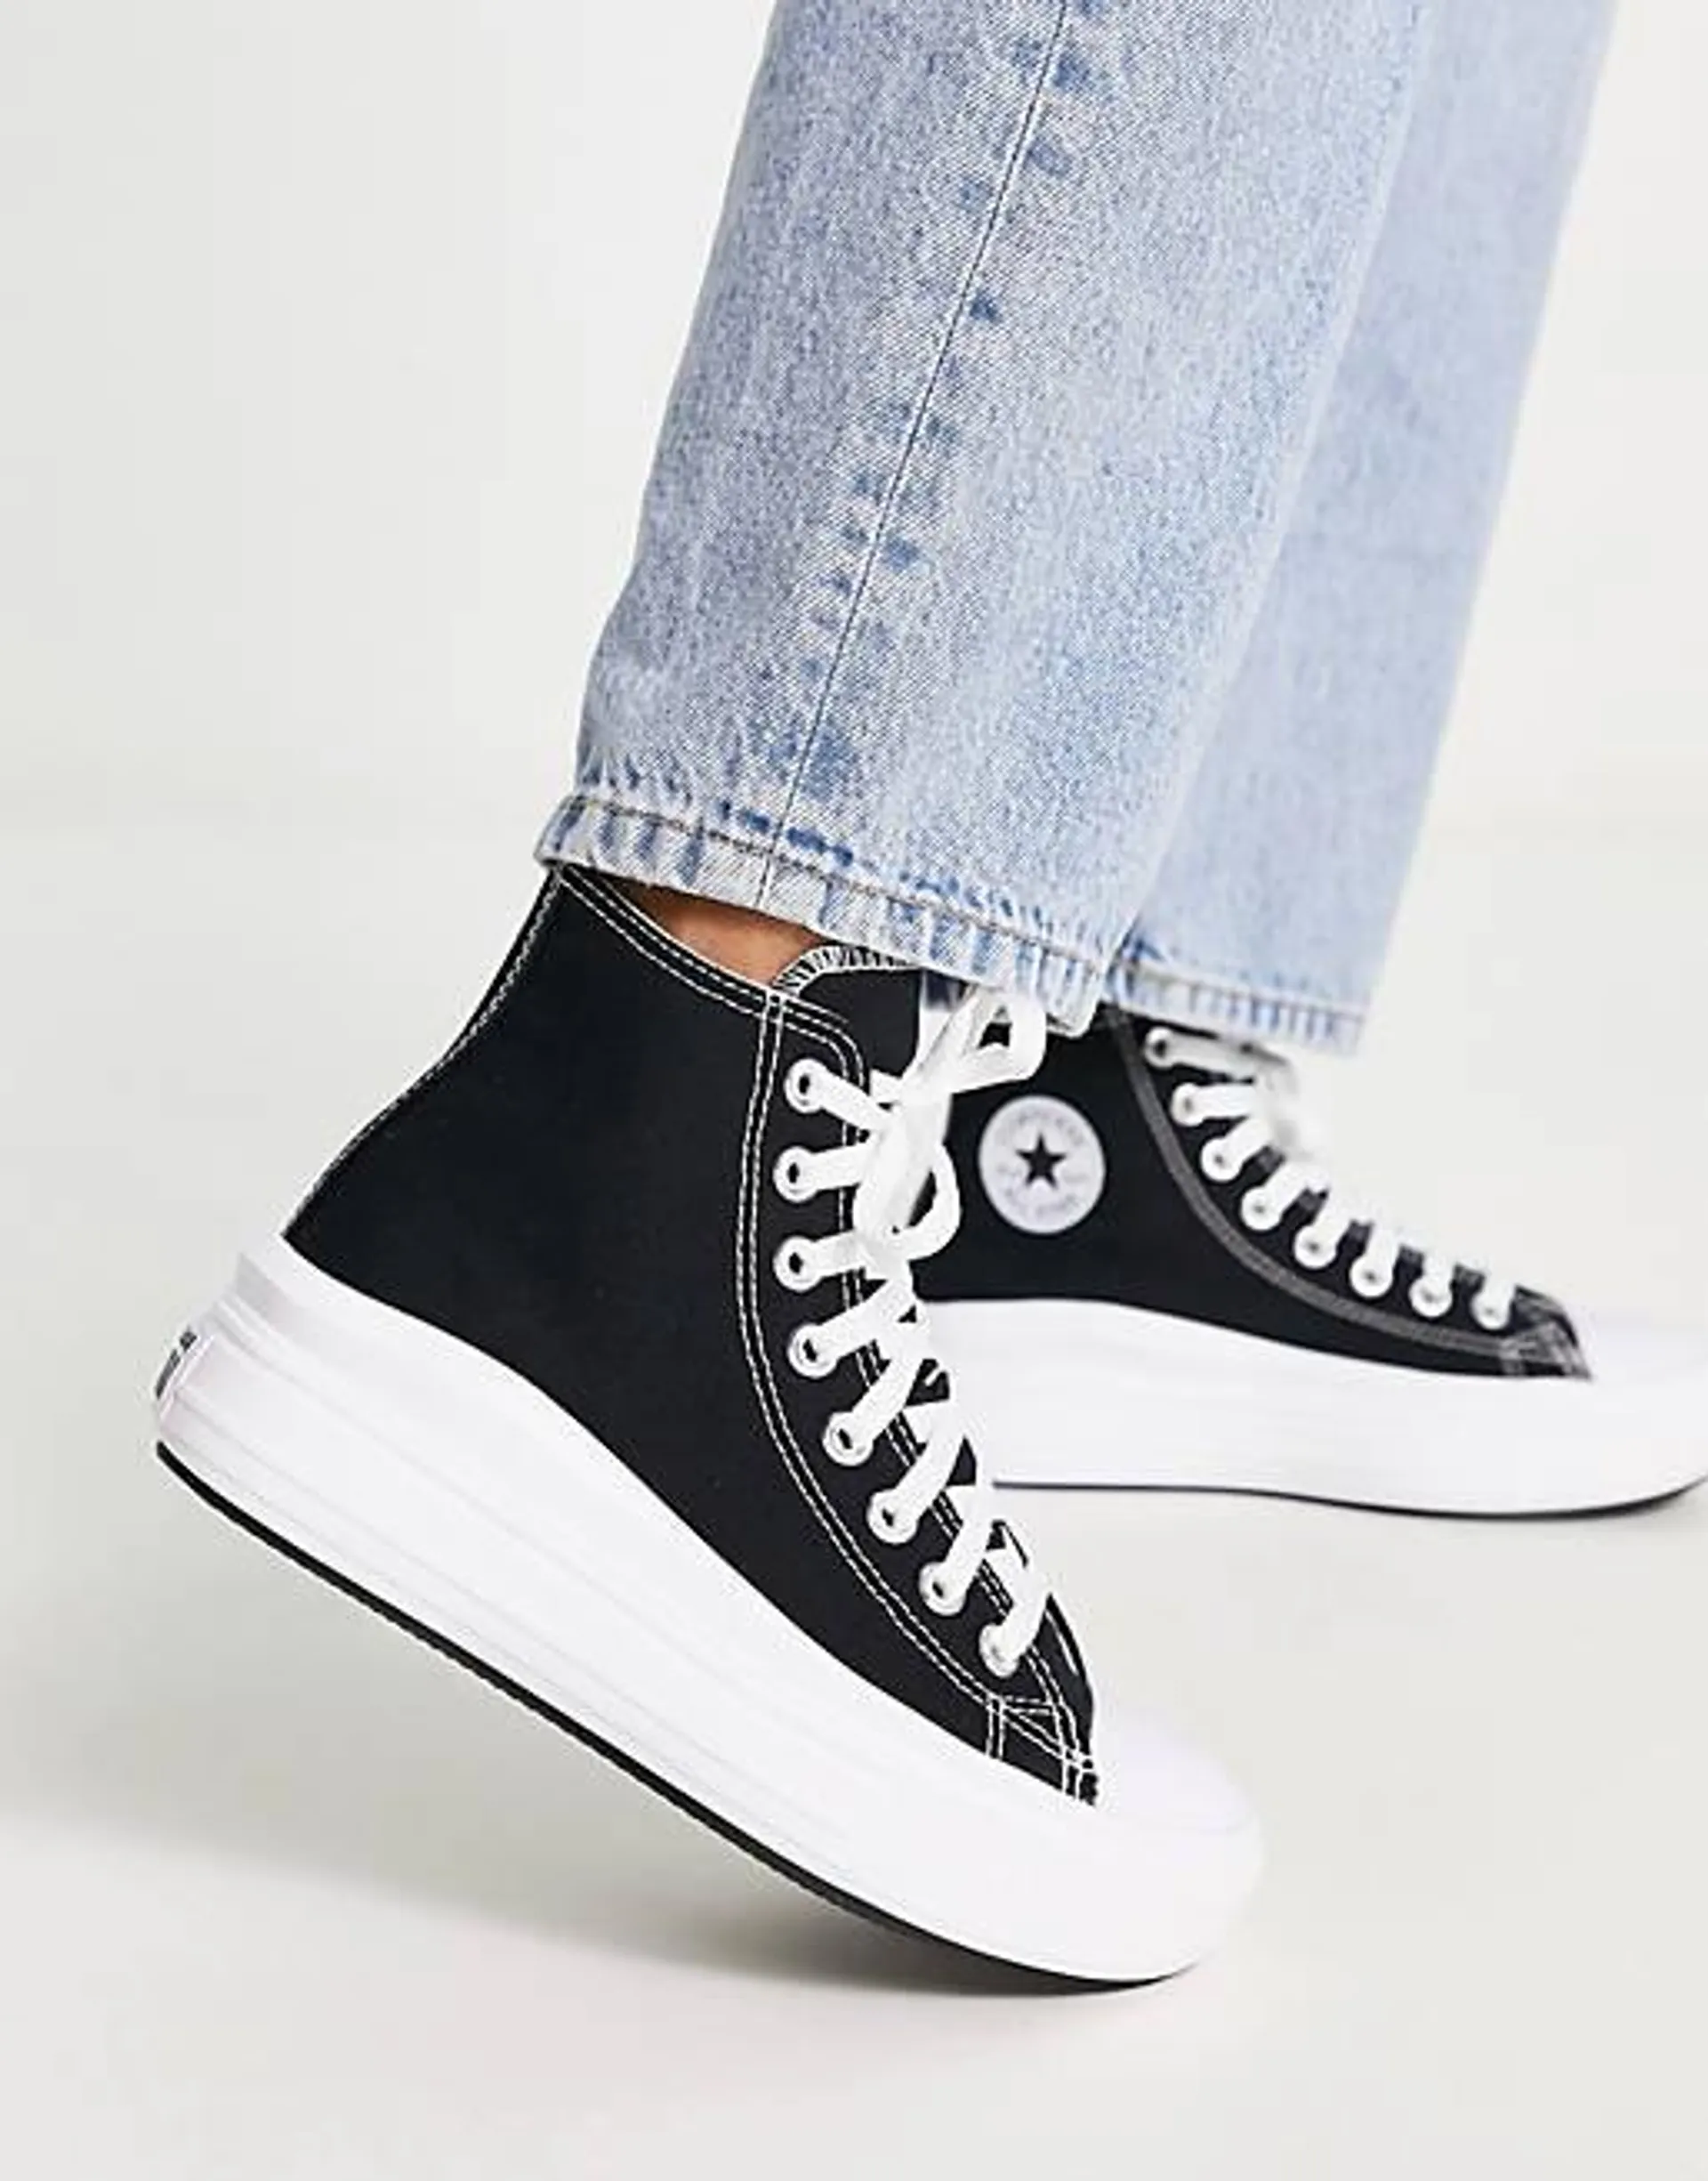 Converse Chuck Taylor All Star Move Hi trainers in black